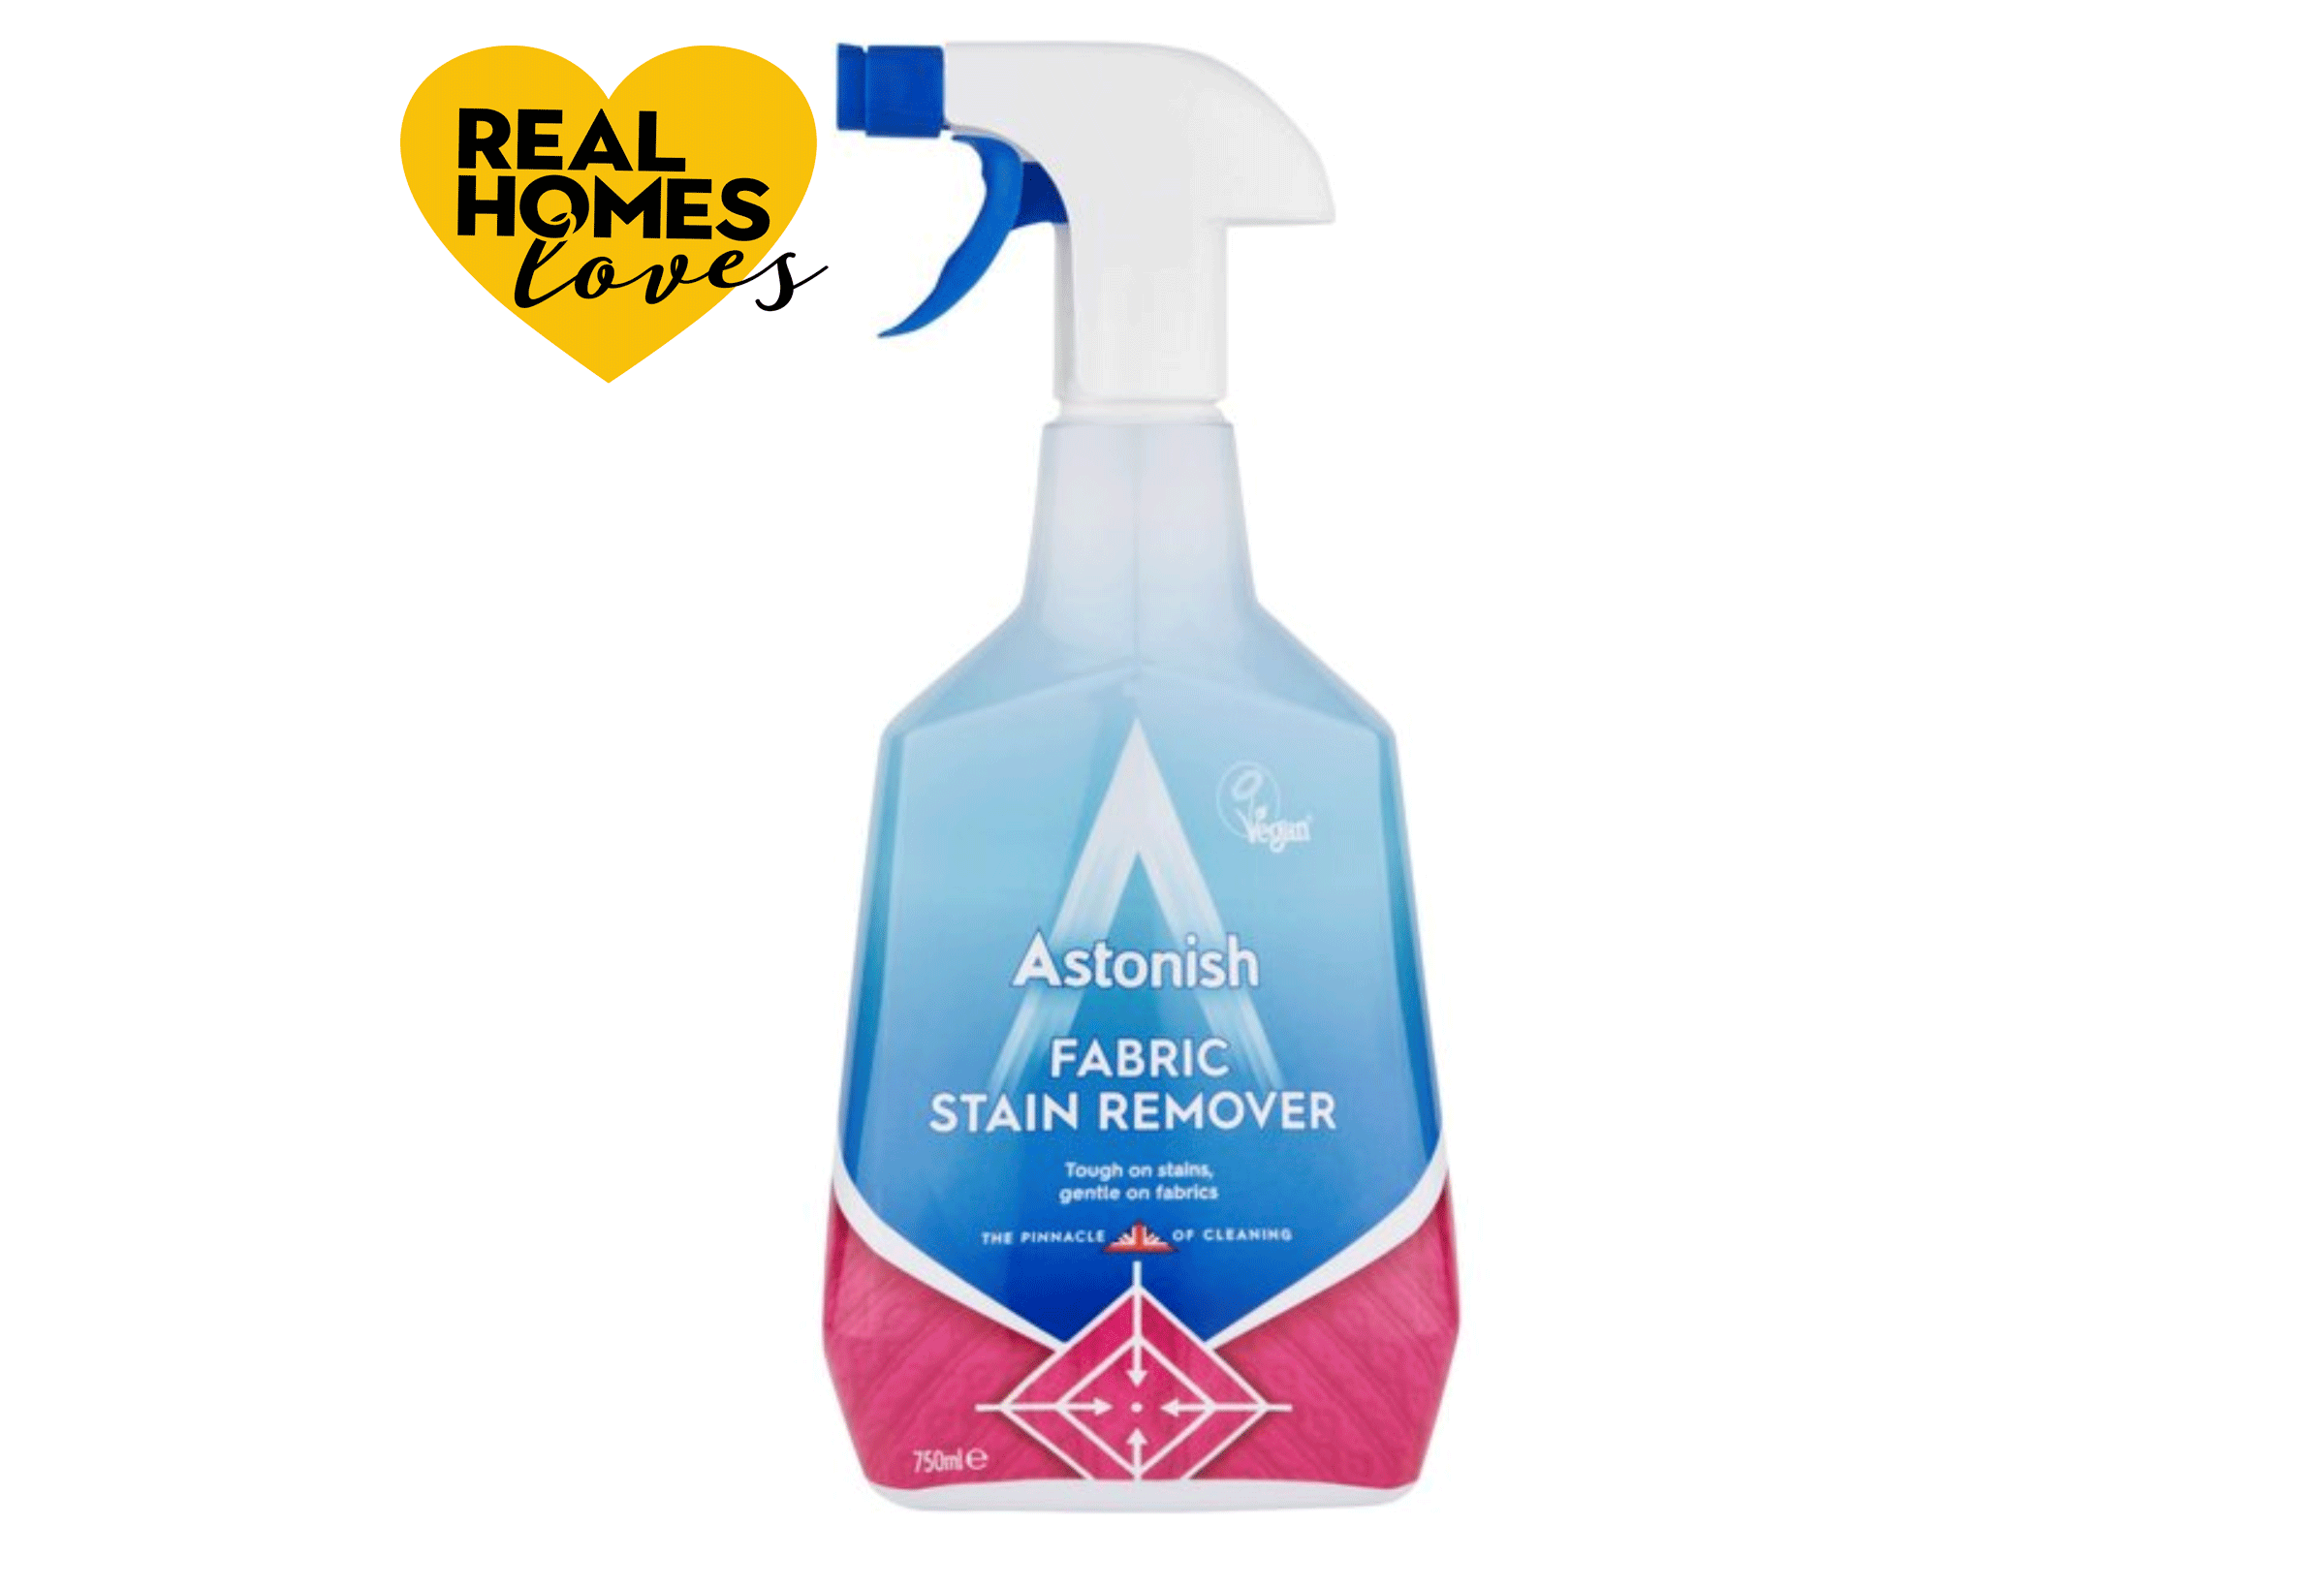 Best upholstery cleaner for thorough furniture cleaning | Real Homes